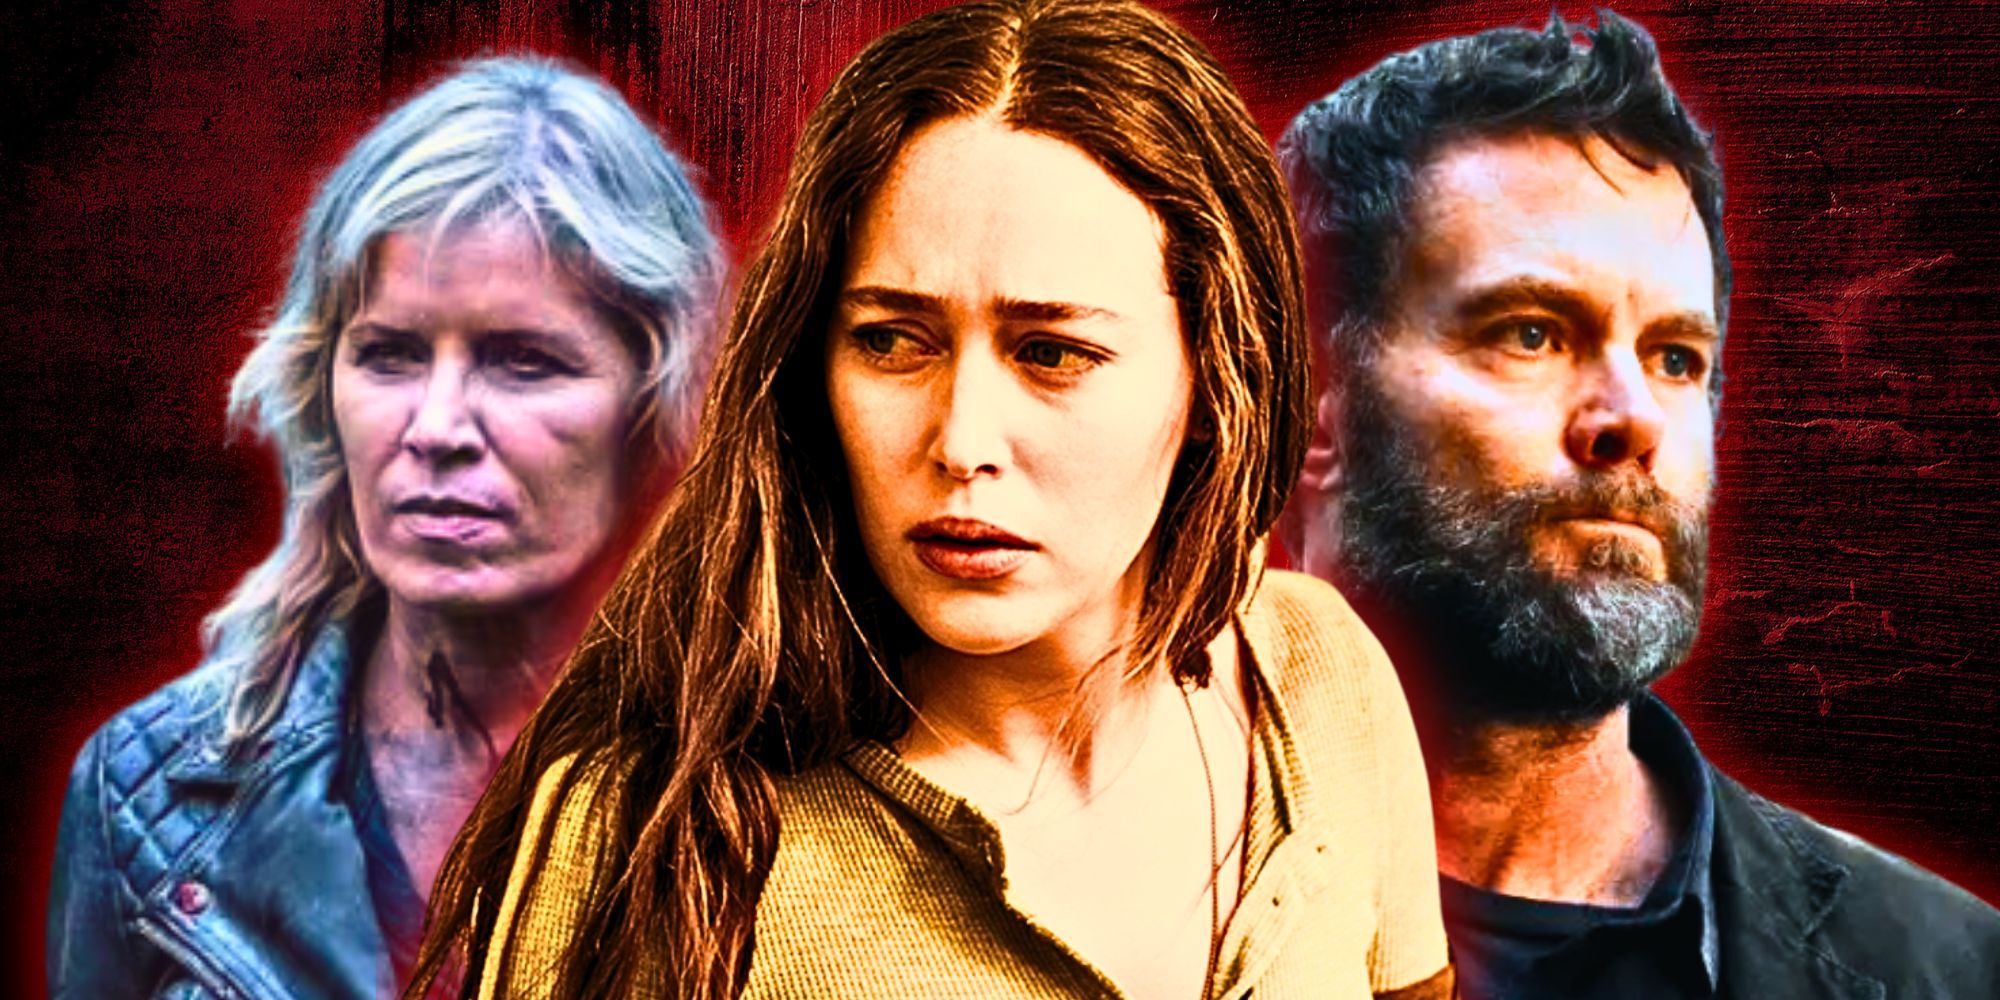 Custom image of Madison Clark, Alicia Clark, and John Dorie from Fear The Walking Dead against a red background